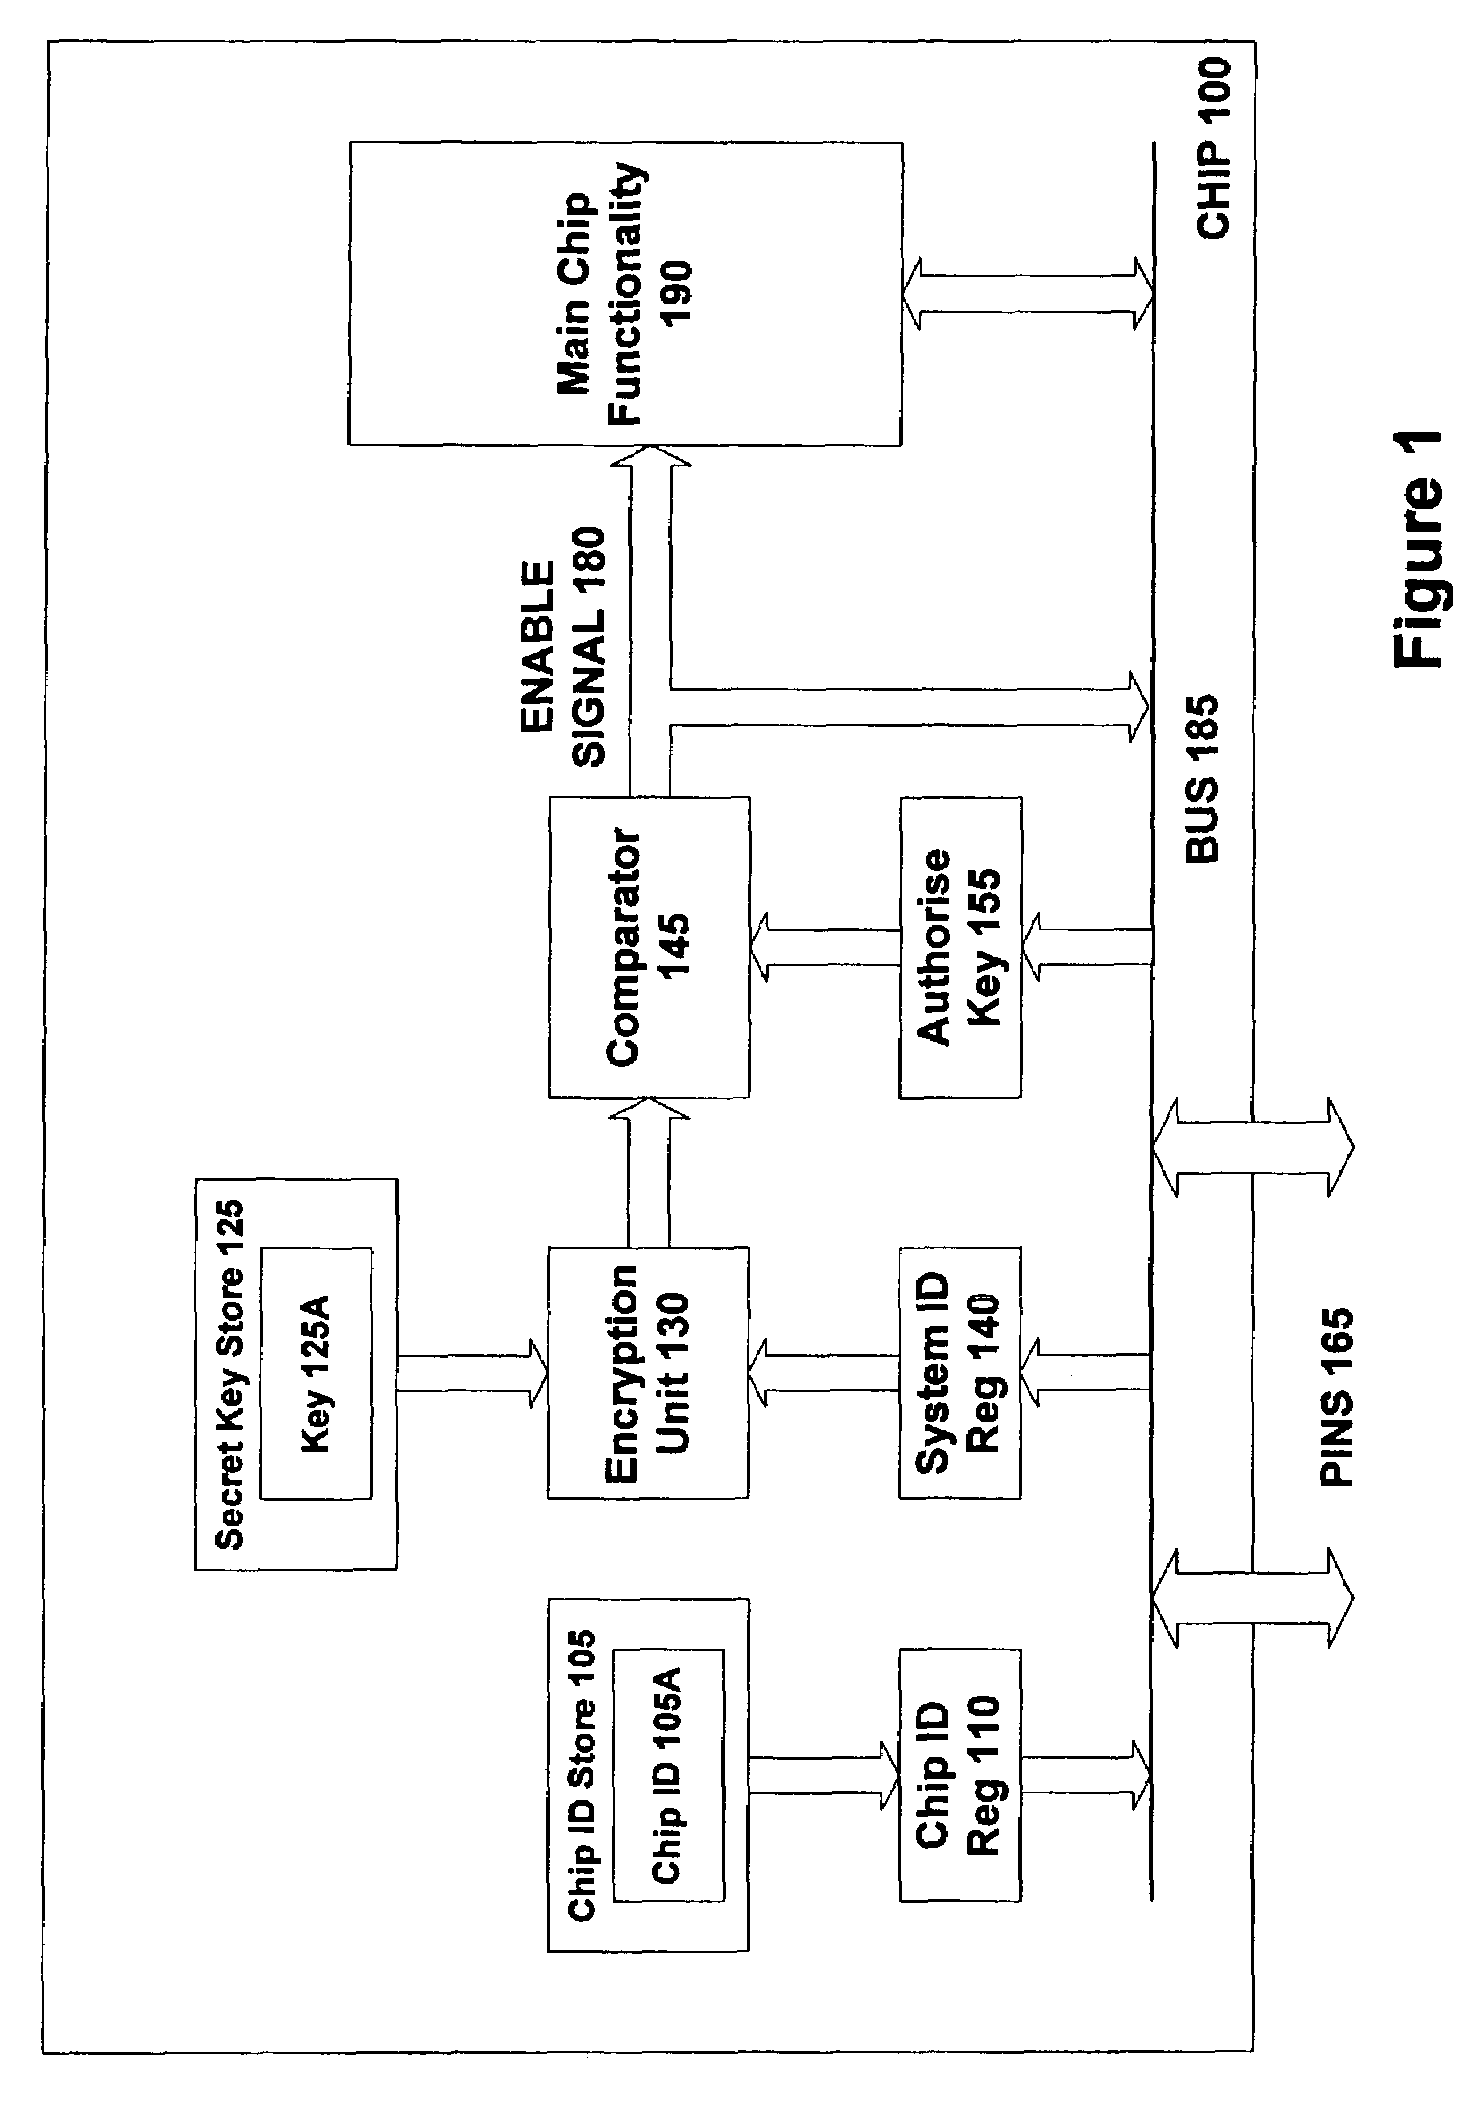 Anti-theft system and method for semiconductor devices and other electronic components